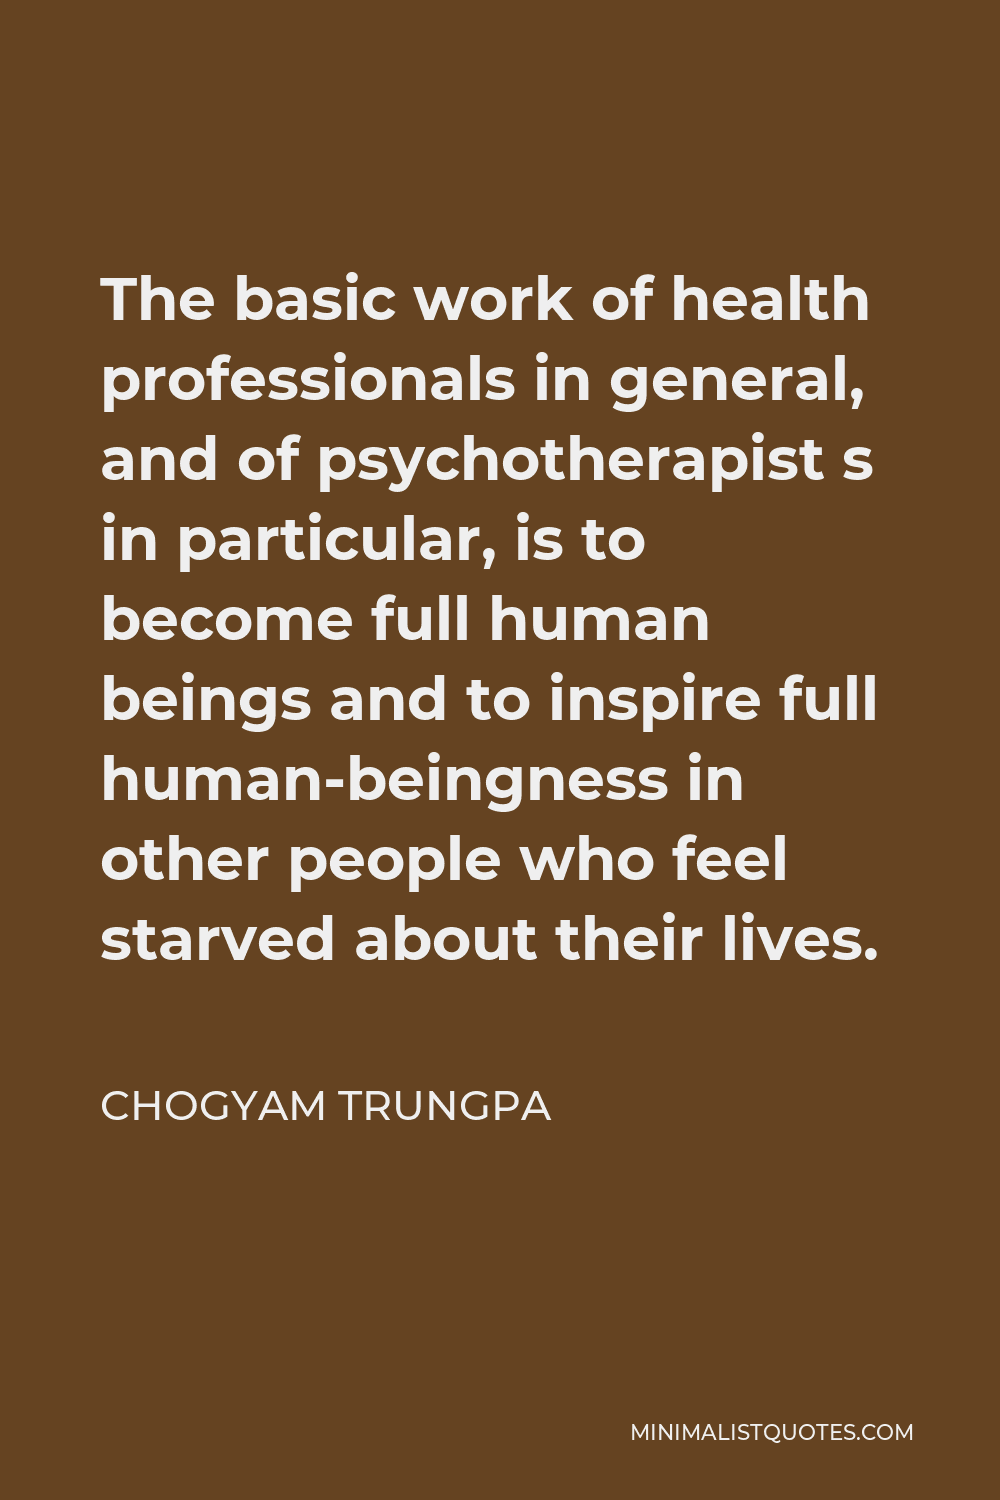 Chogyam Trungpa Quote - The basic work of health professionals in general, and of psychotherapist s in particular, is to become full human beings and to inspire full human-beingness in other people who feel starved about their lives.